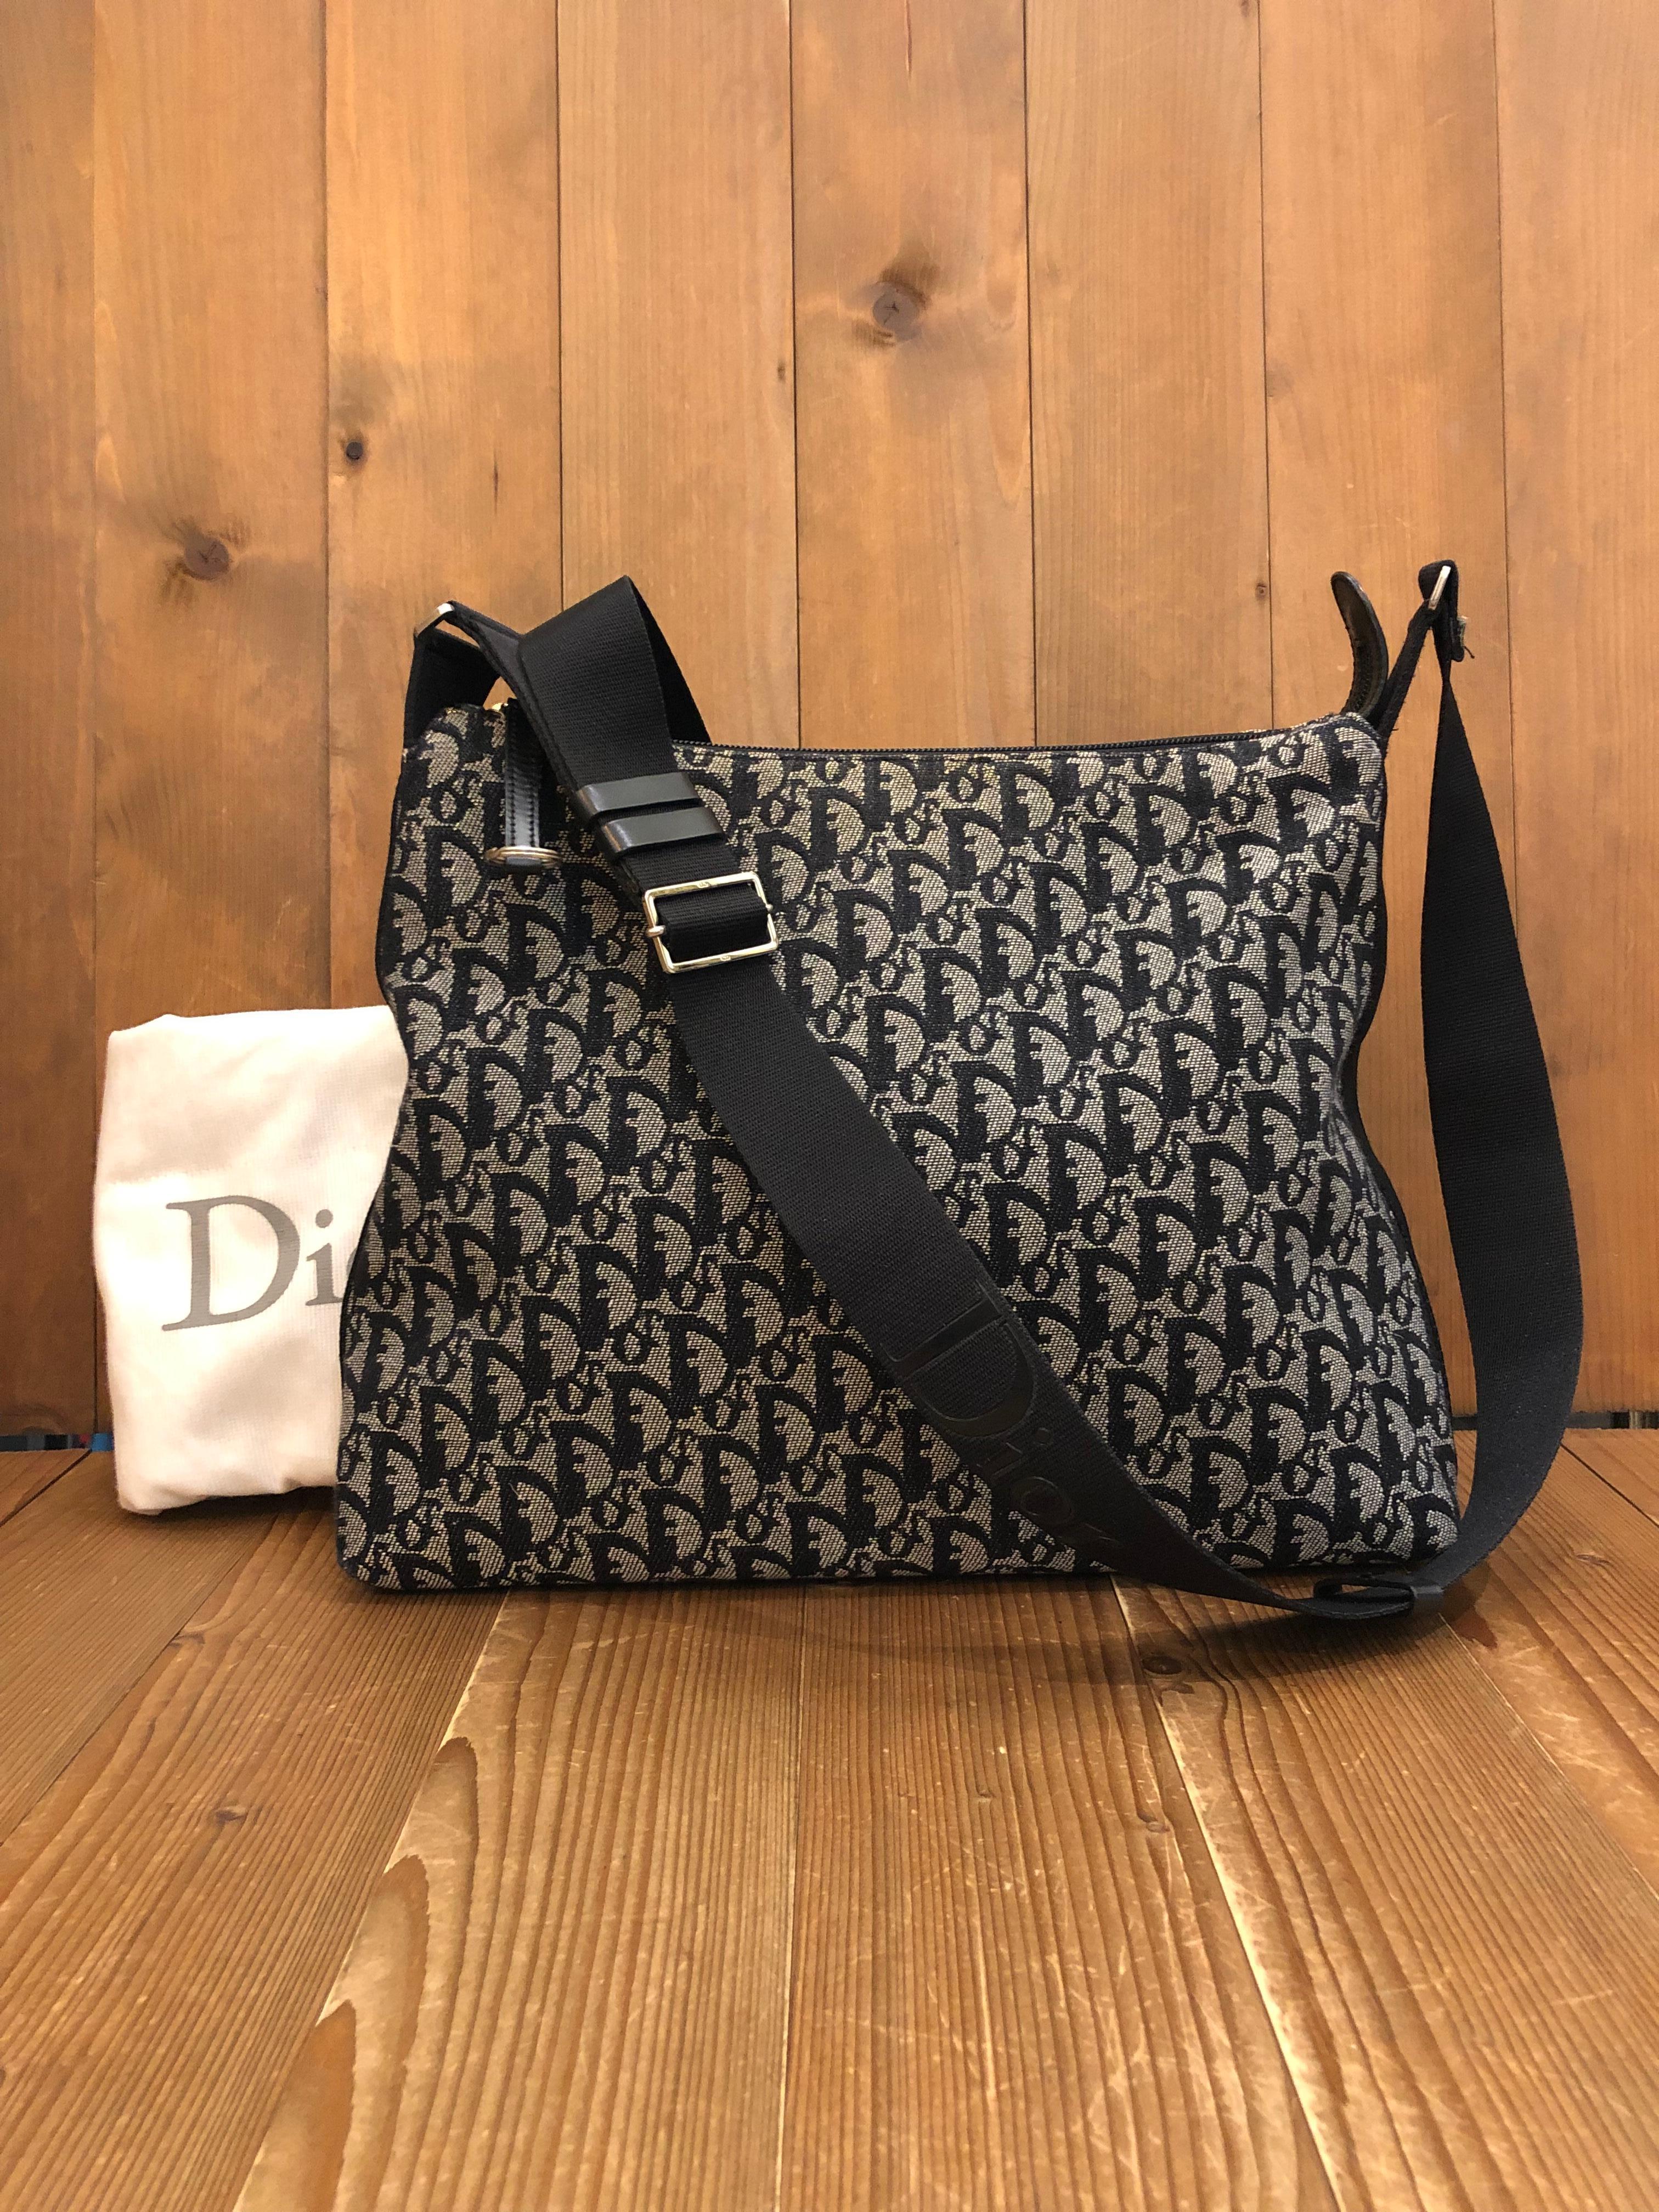 This stylish Christian Dior messenger crossbody bag is crafted of Dior’s trotter jacquard in black featuring silver toned hardware. Top zipper closure opens to spacious interior lined with black fabric featuring a zippered pocket. Made in Italy.